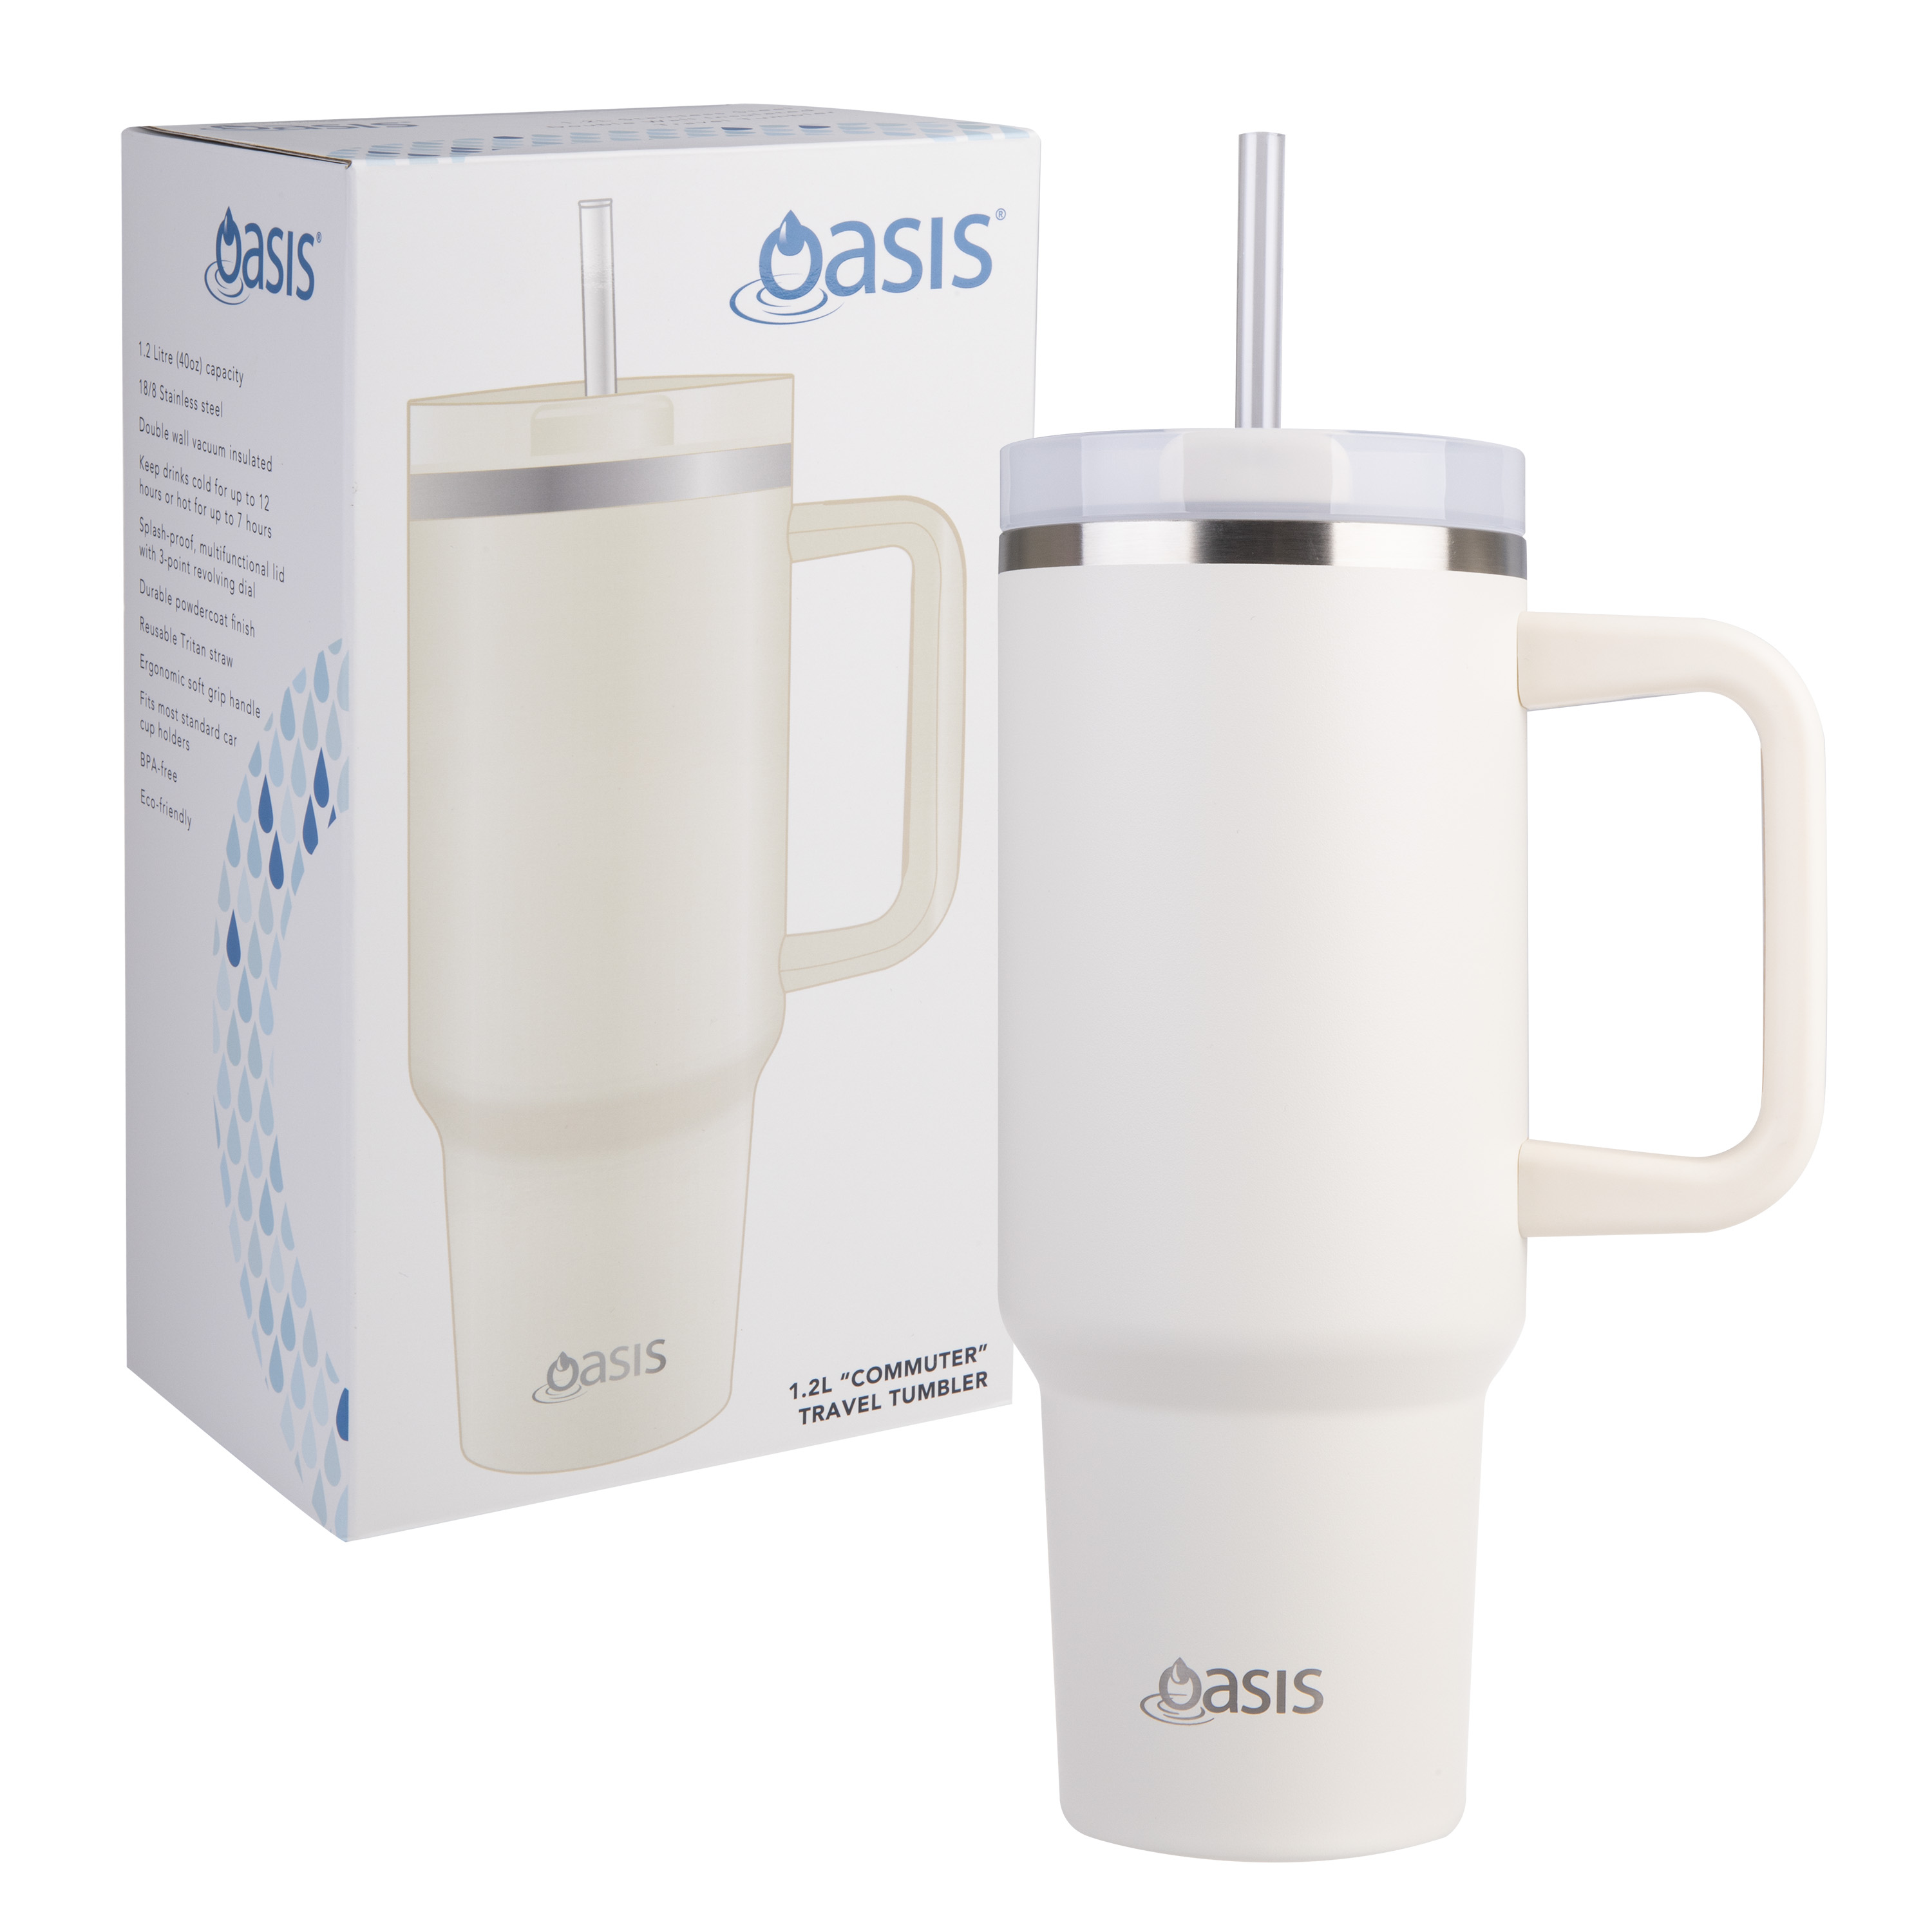 Oasis Stainless Steel Insulated Commuter Travel Tumbler Alabaster